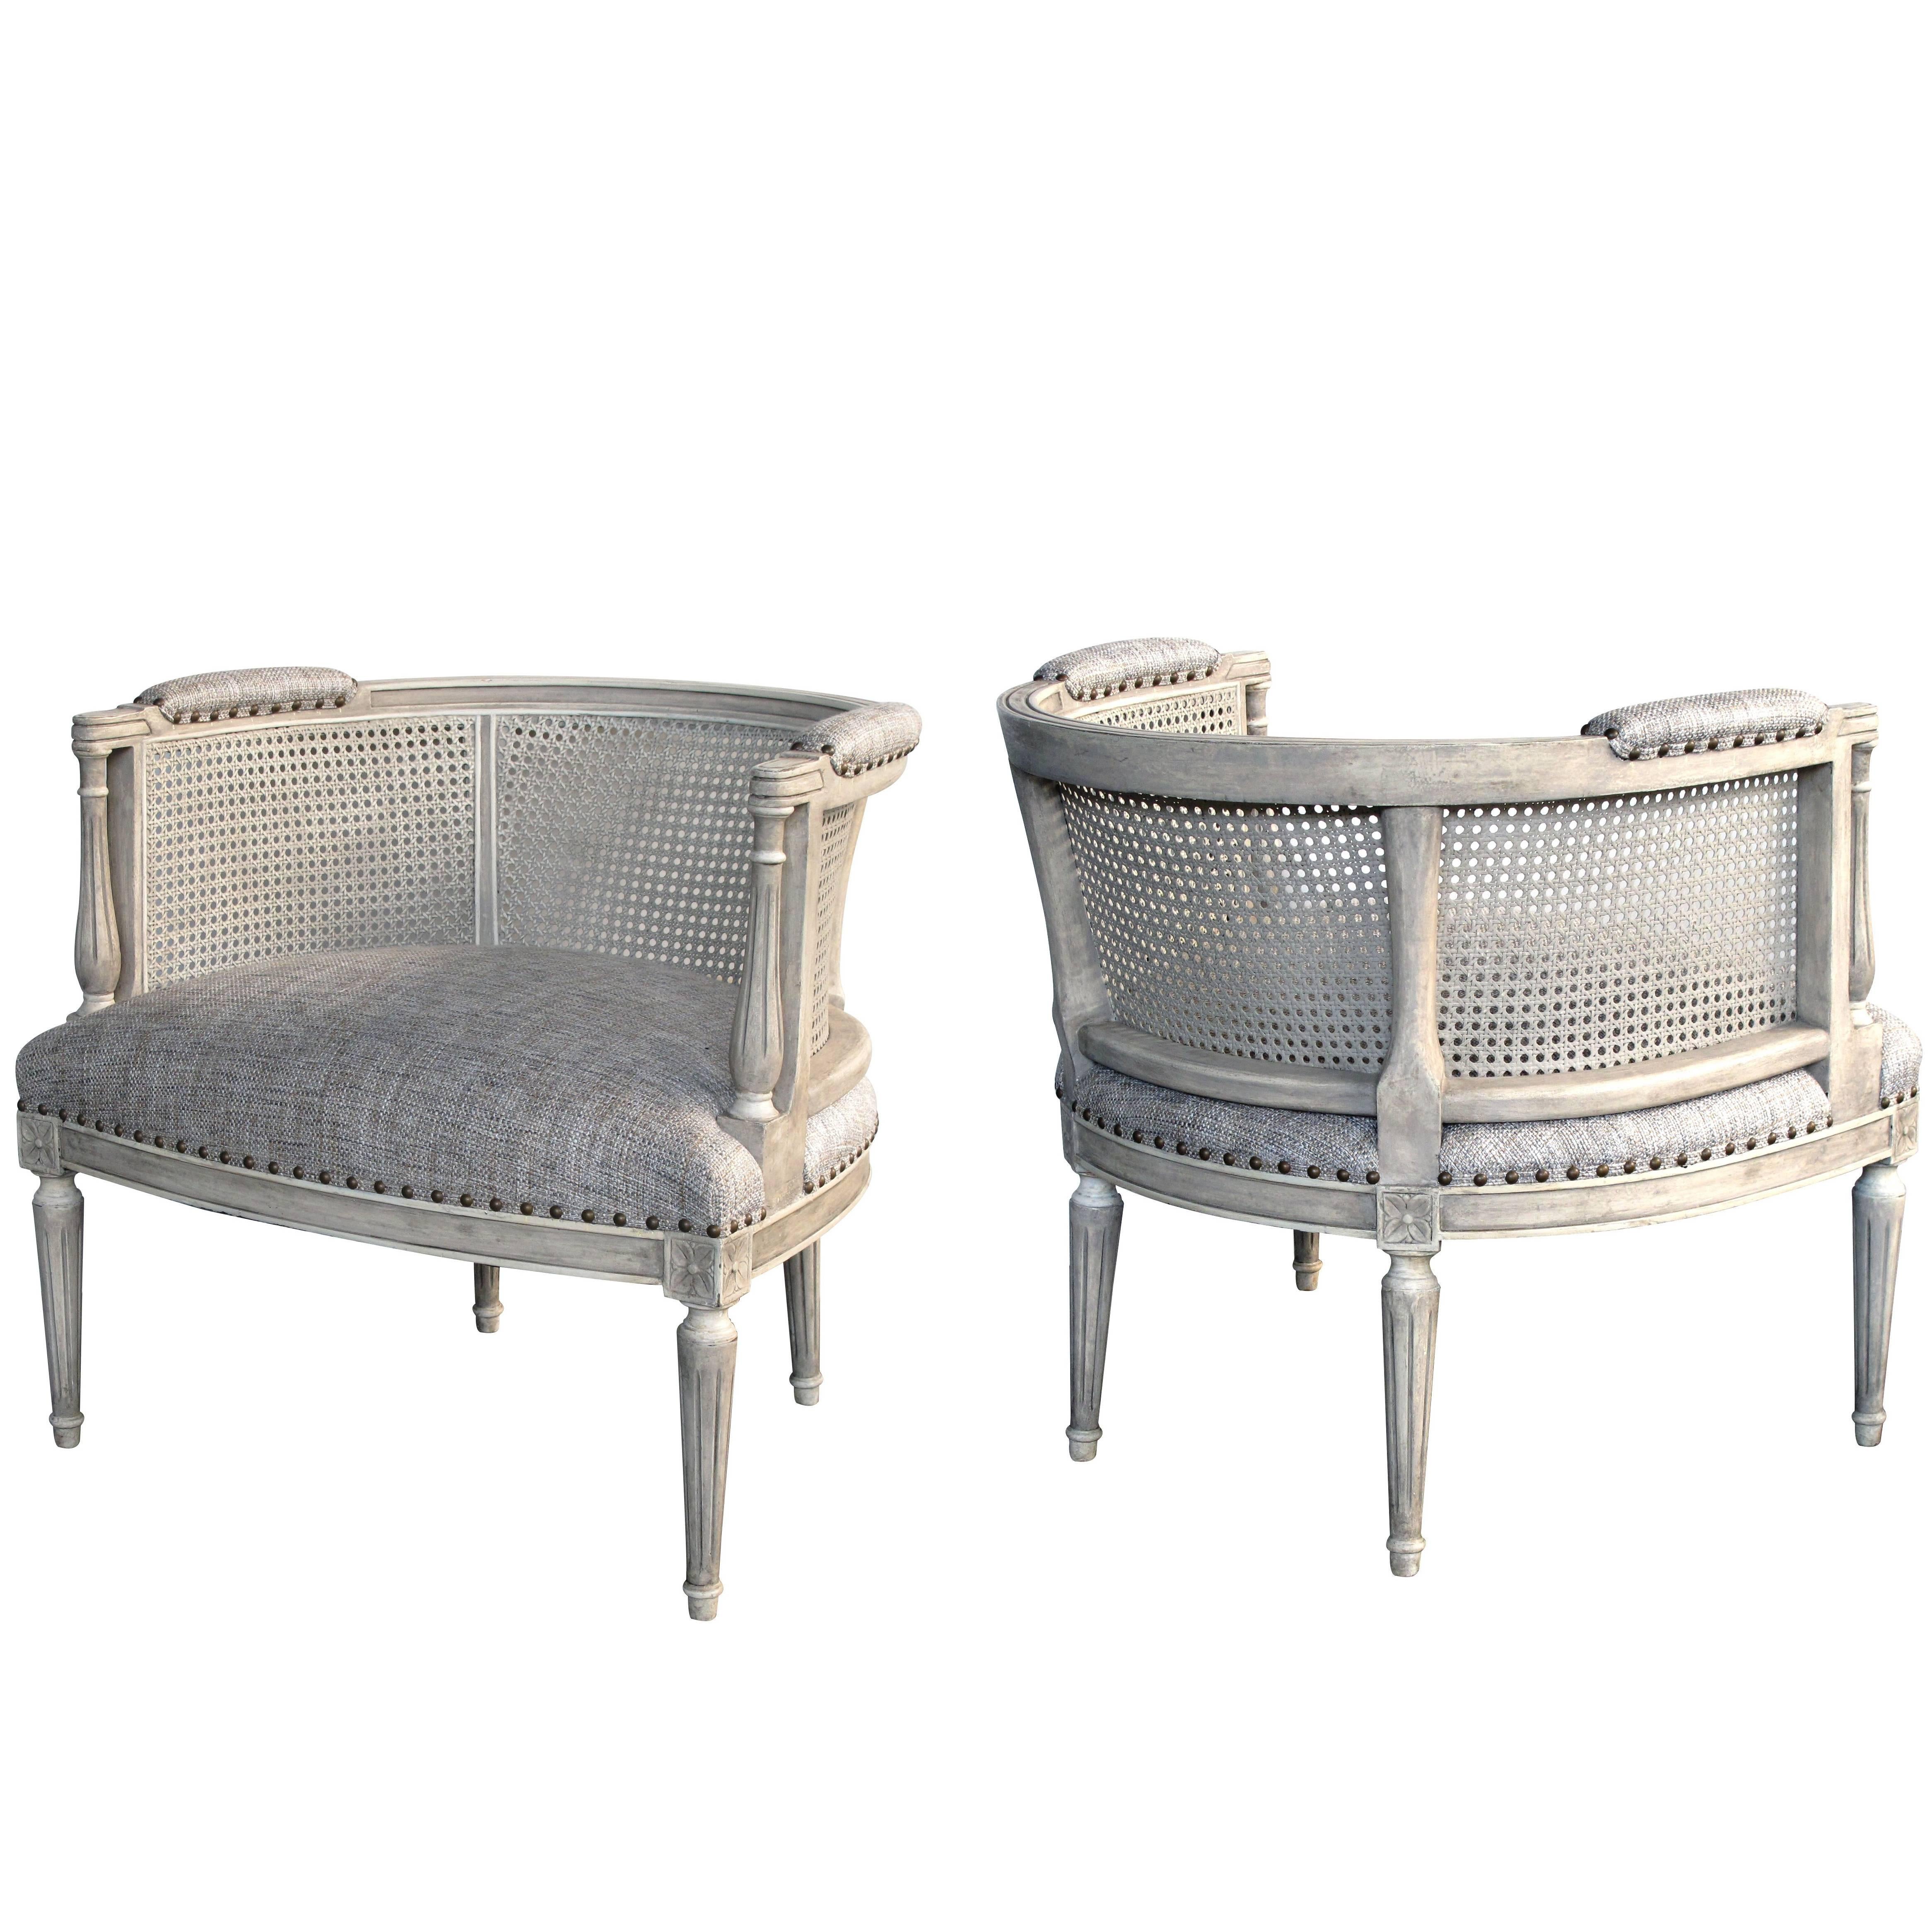 Stylish Pair of Hollywood Regency 1960s Painted Barrel-Back Chairs